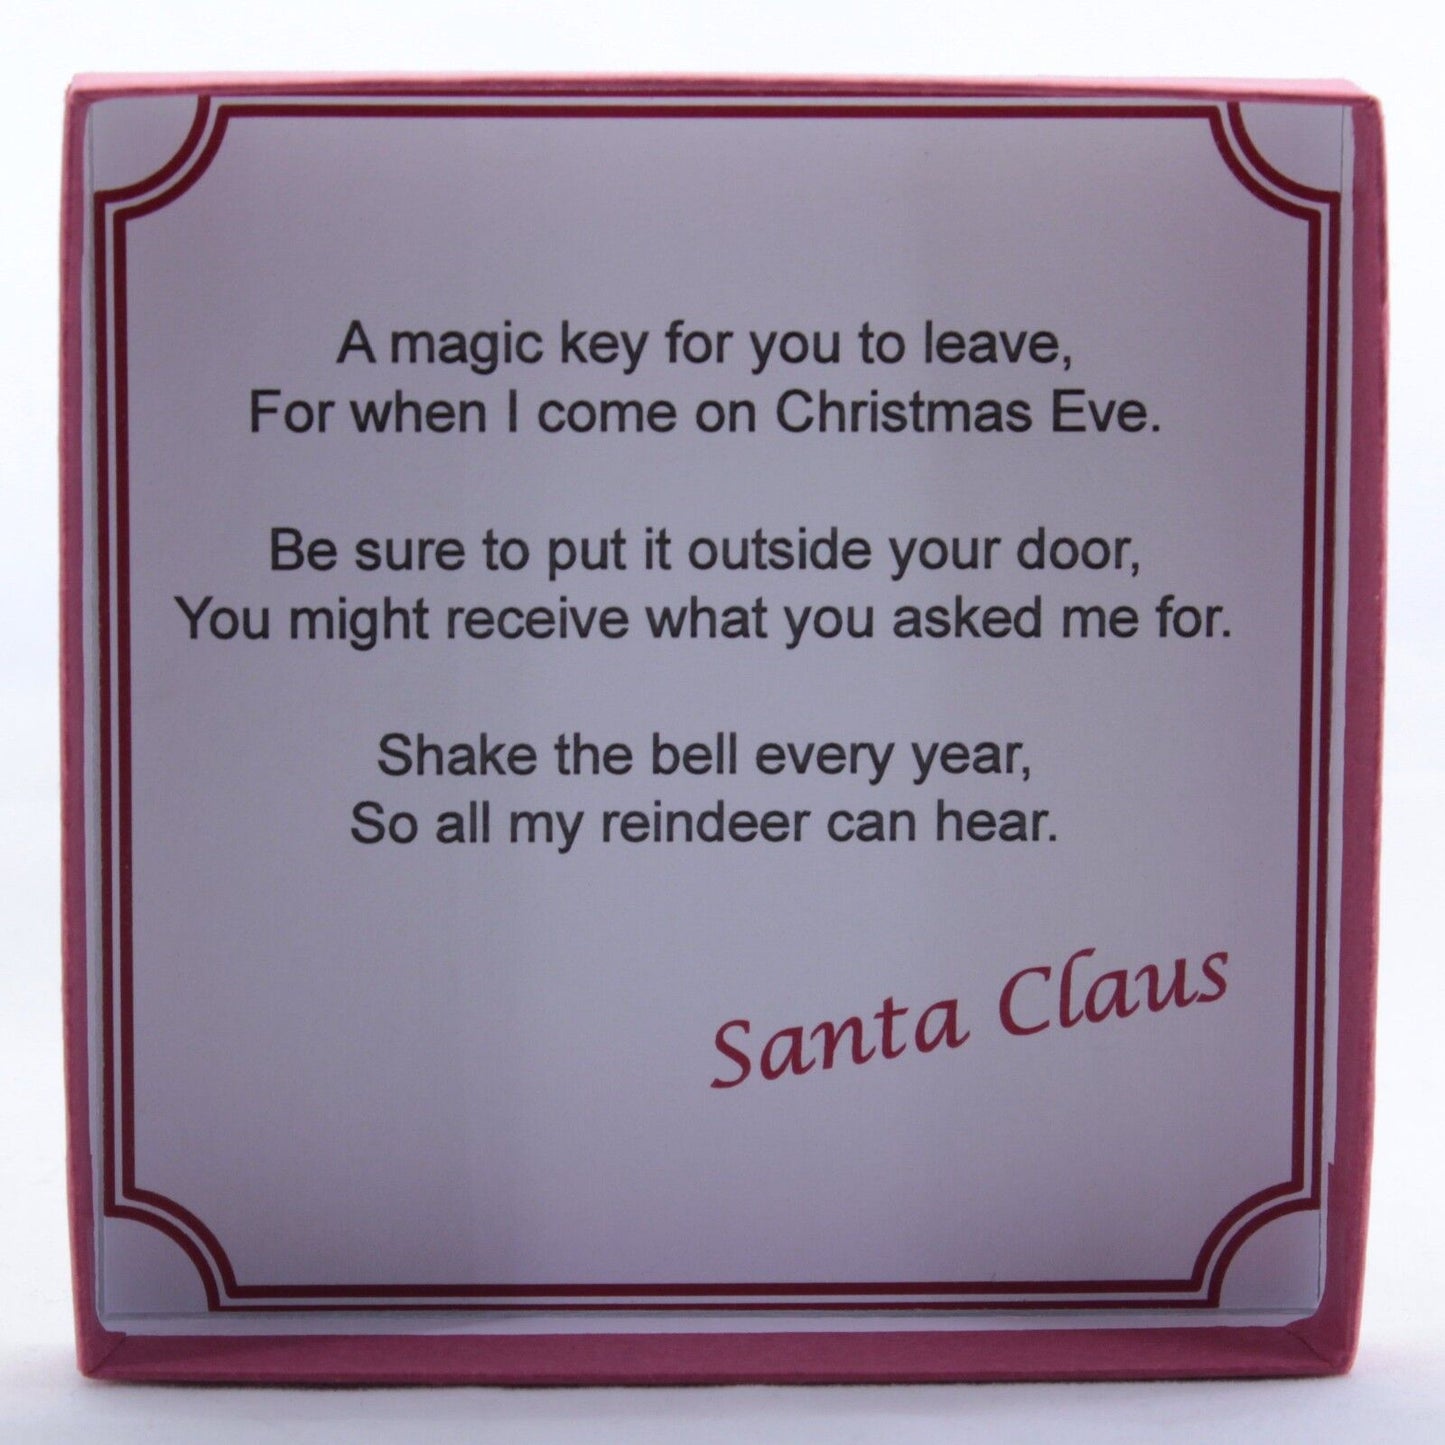 Santa Claus / Father Christmas Magic Key - Acrylic Key in Box With Poem in Lid